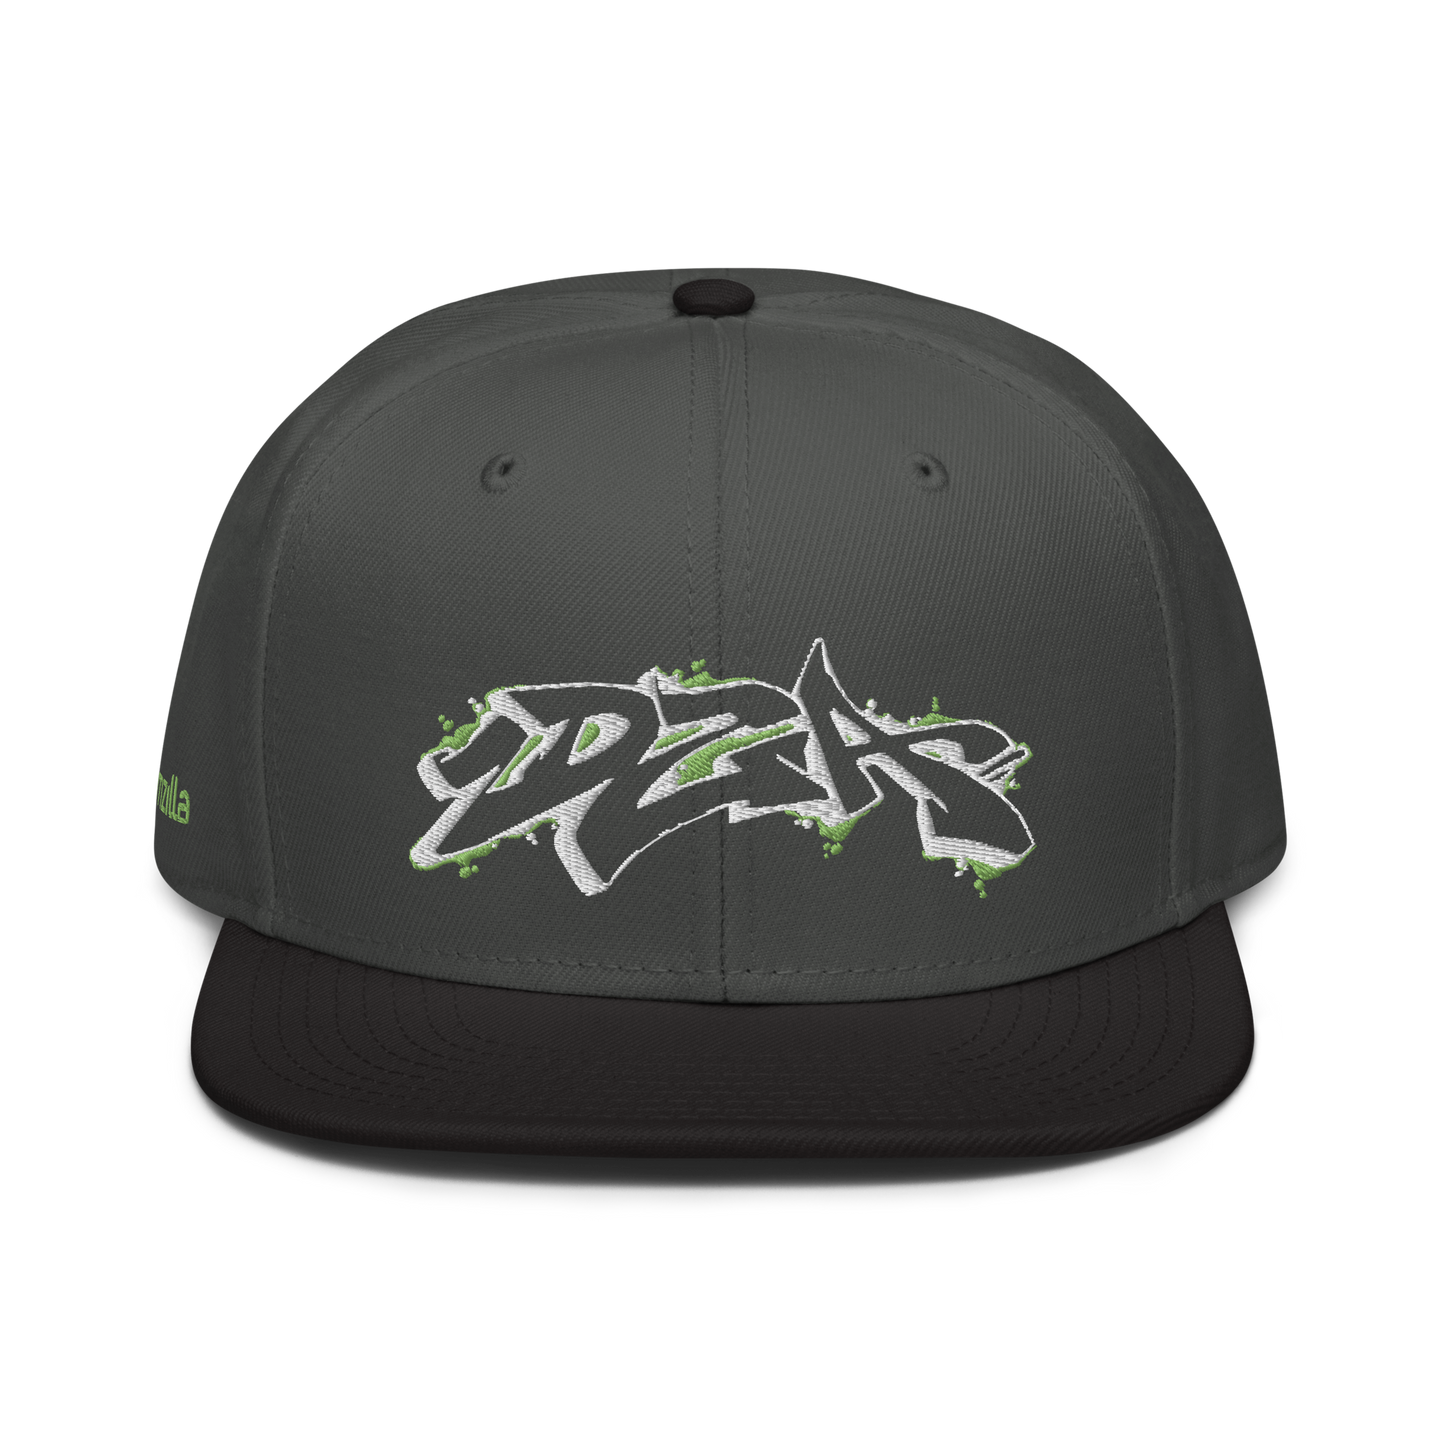 Graffiti DZA Snapback by Sanitor in Charcoal Gray with Black Brim